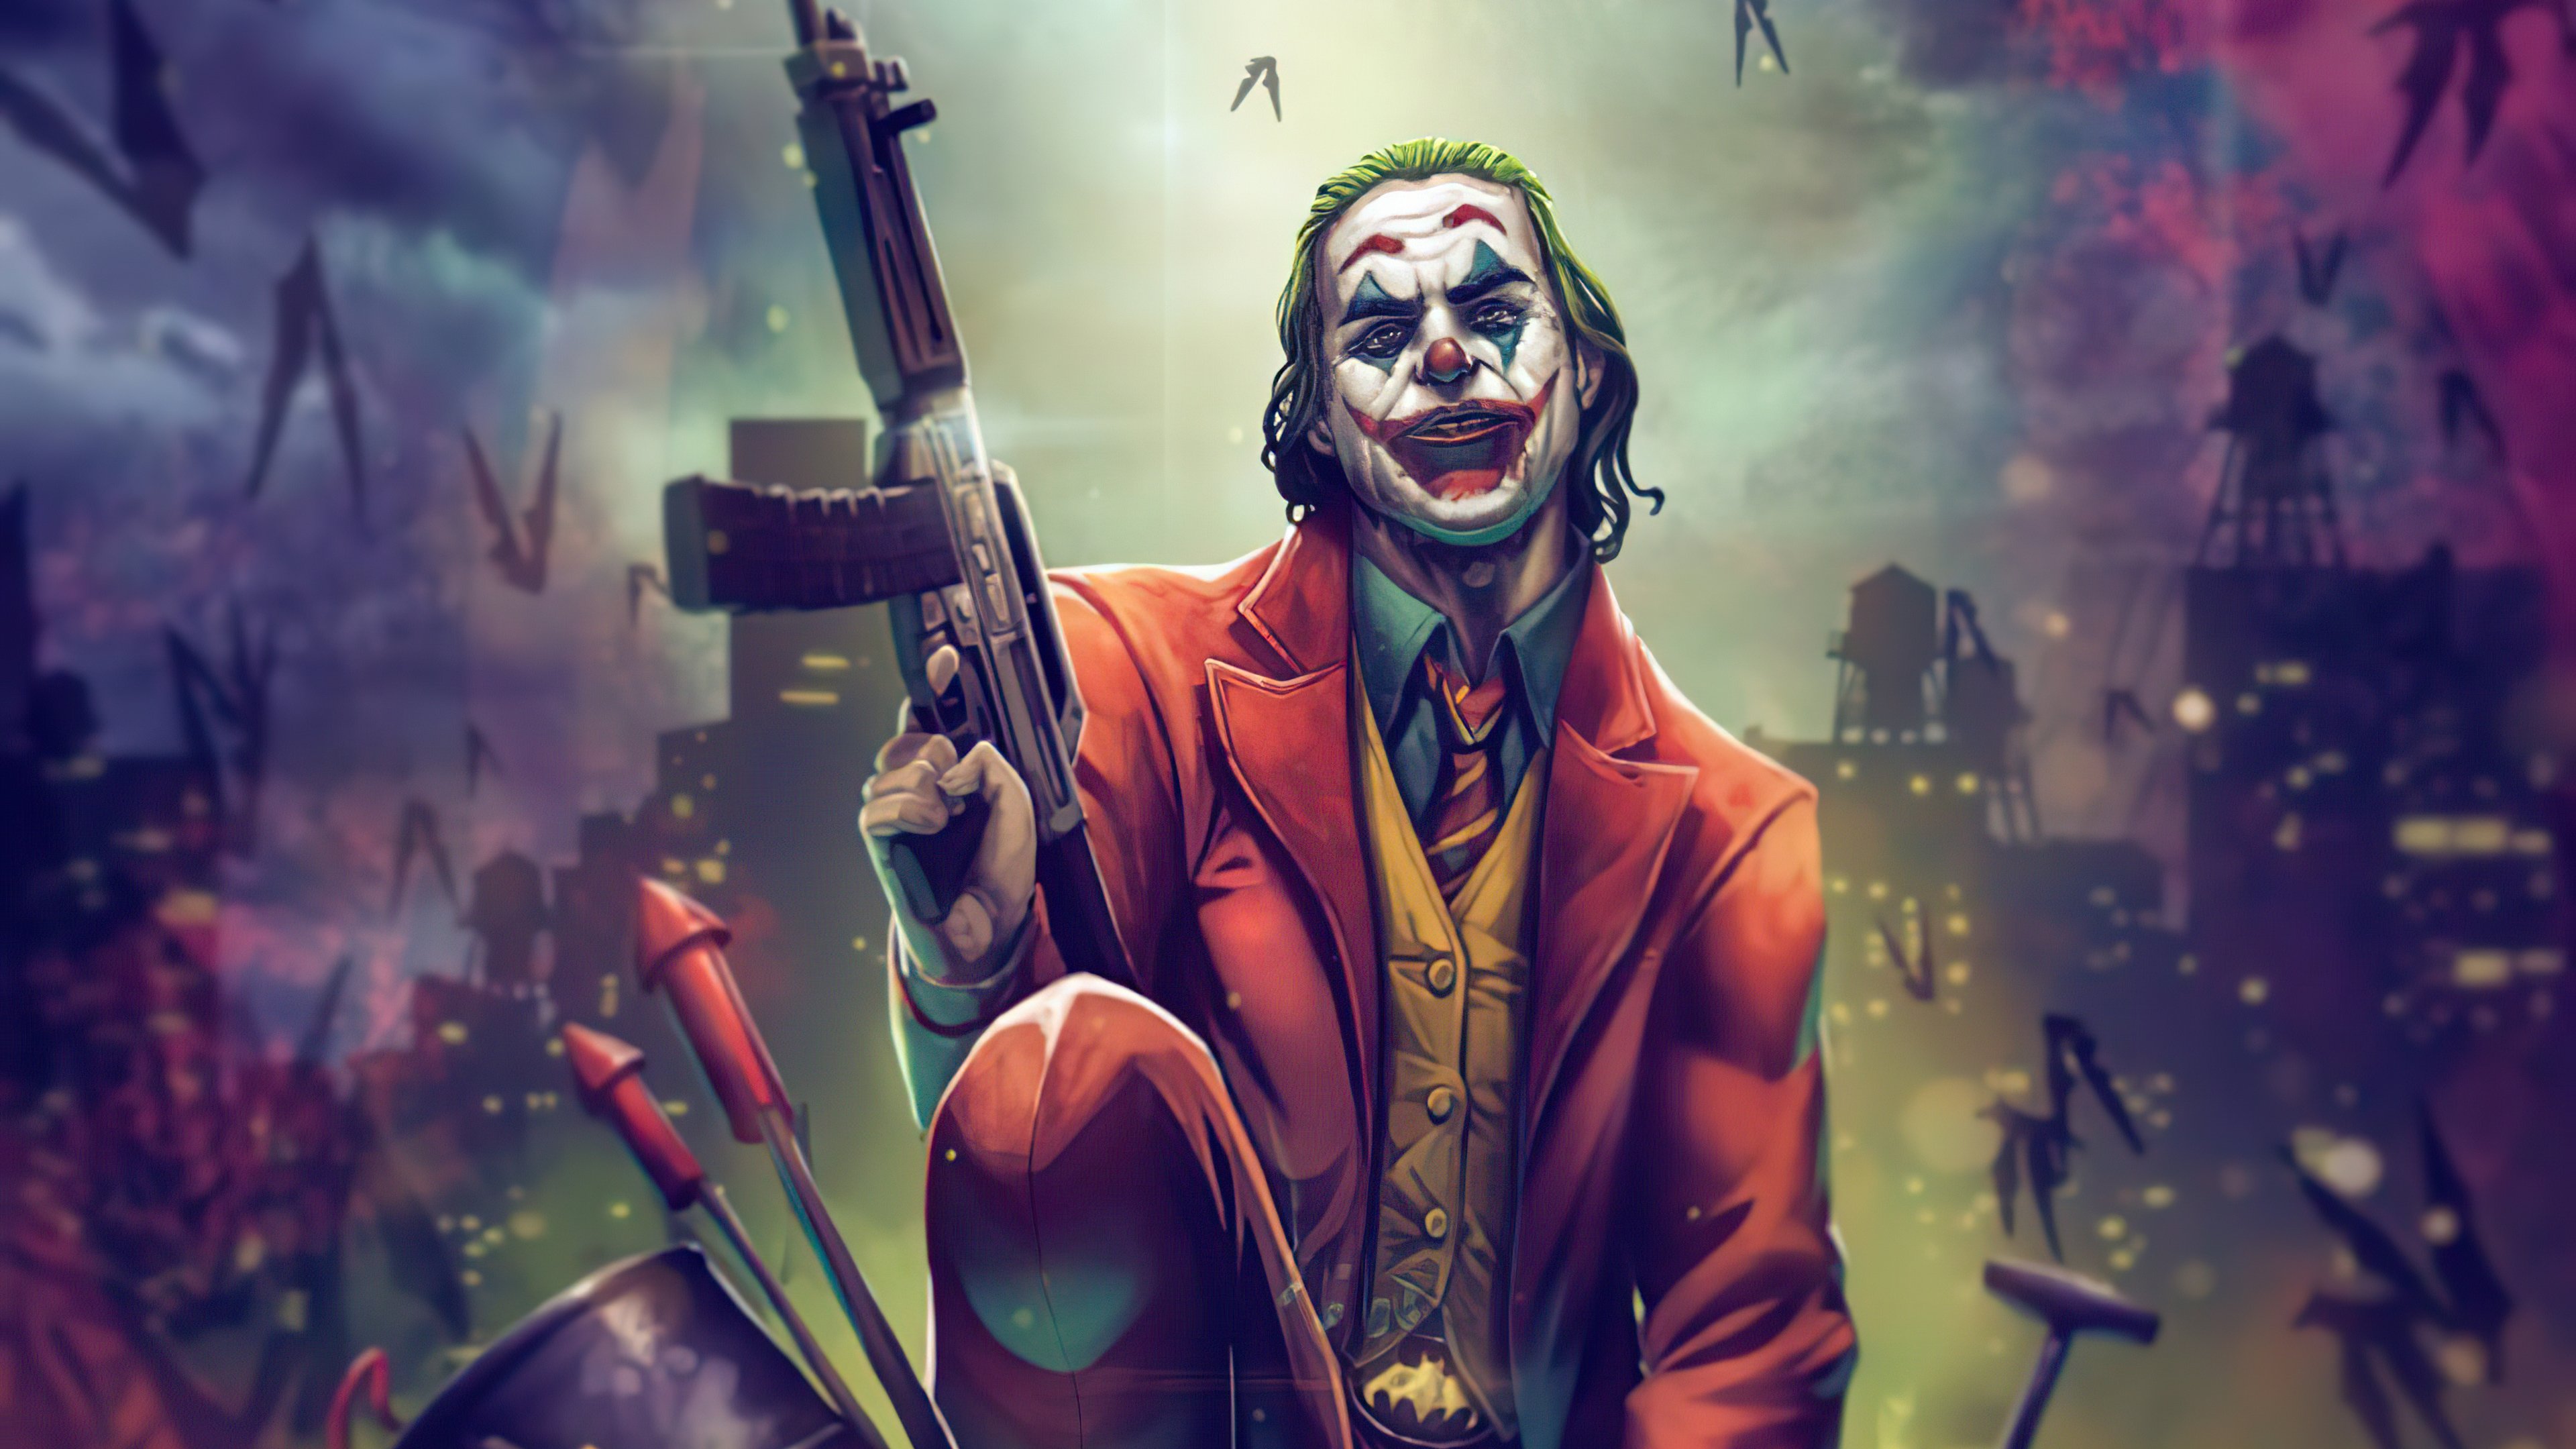 Joker With Gun Up 4k 1366x768 Resolution HD 4k Wallpaper, Image, Background, Photo and Picture